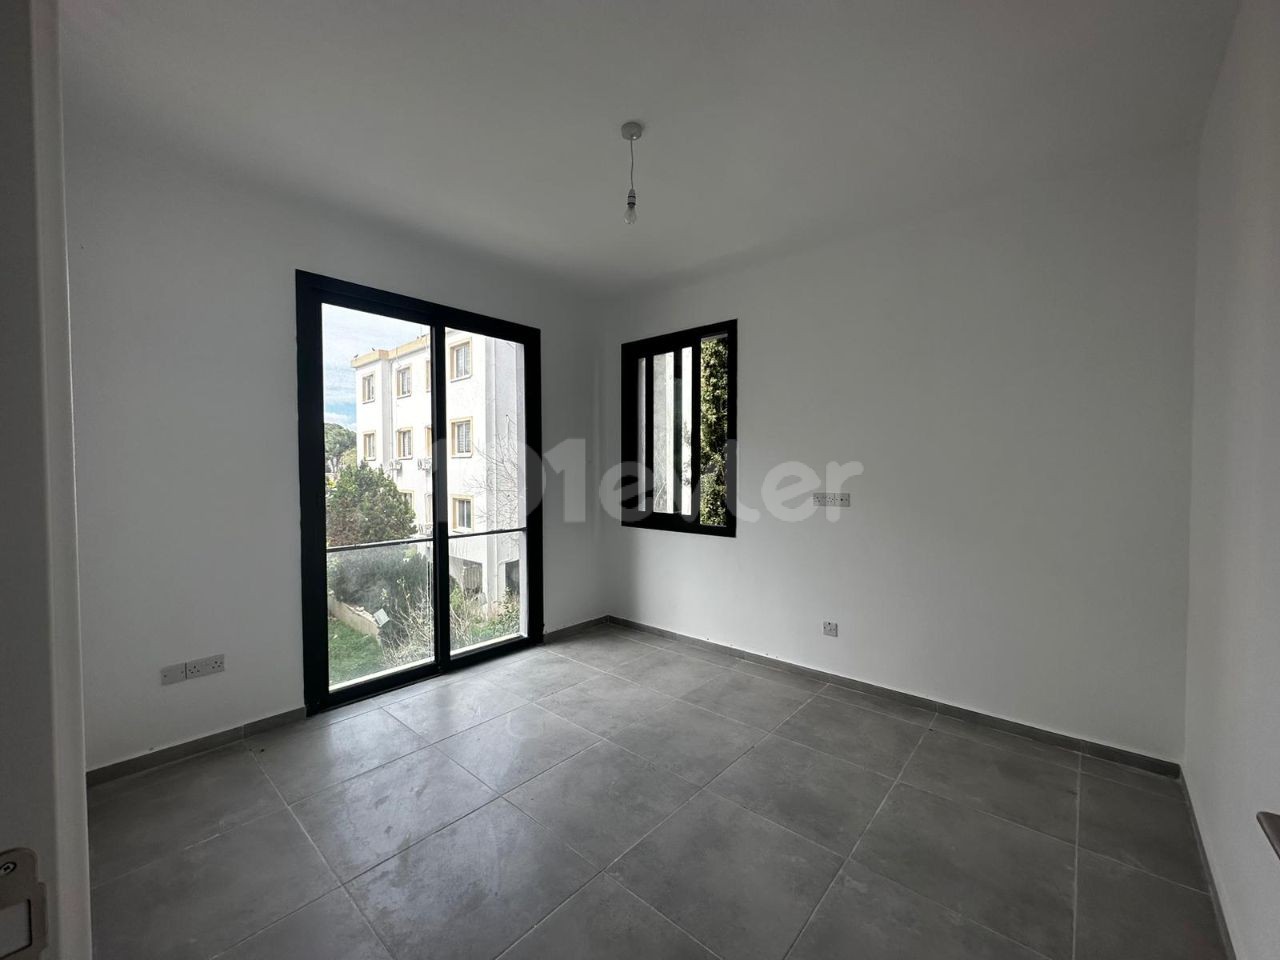 NEWLY COMPLETED 2+1 APARTMENT WITH COMMERCIAL PERMIT IN THE CENTER OF GUINEA, TITLE DEED READY